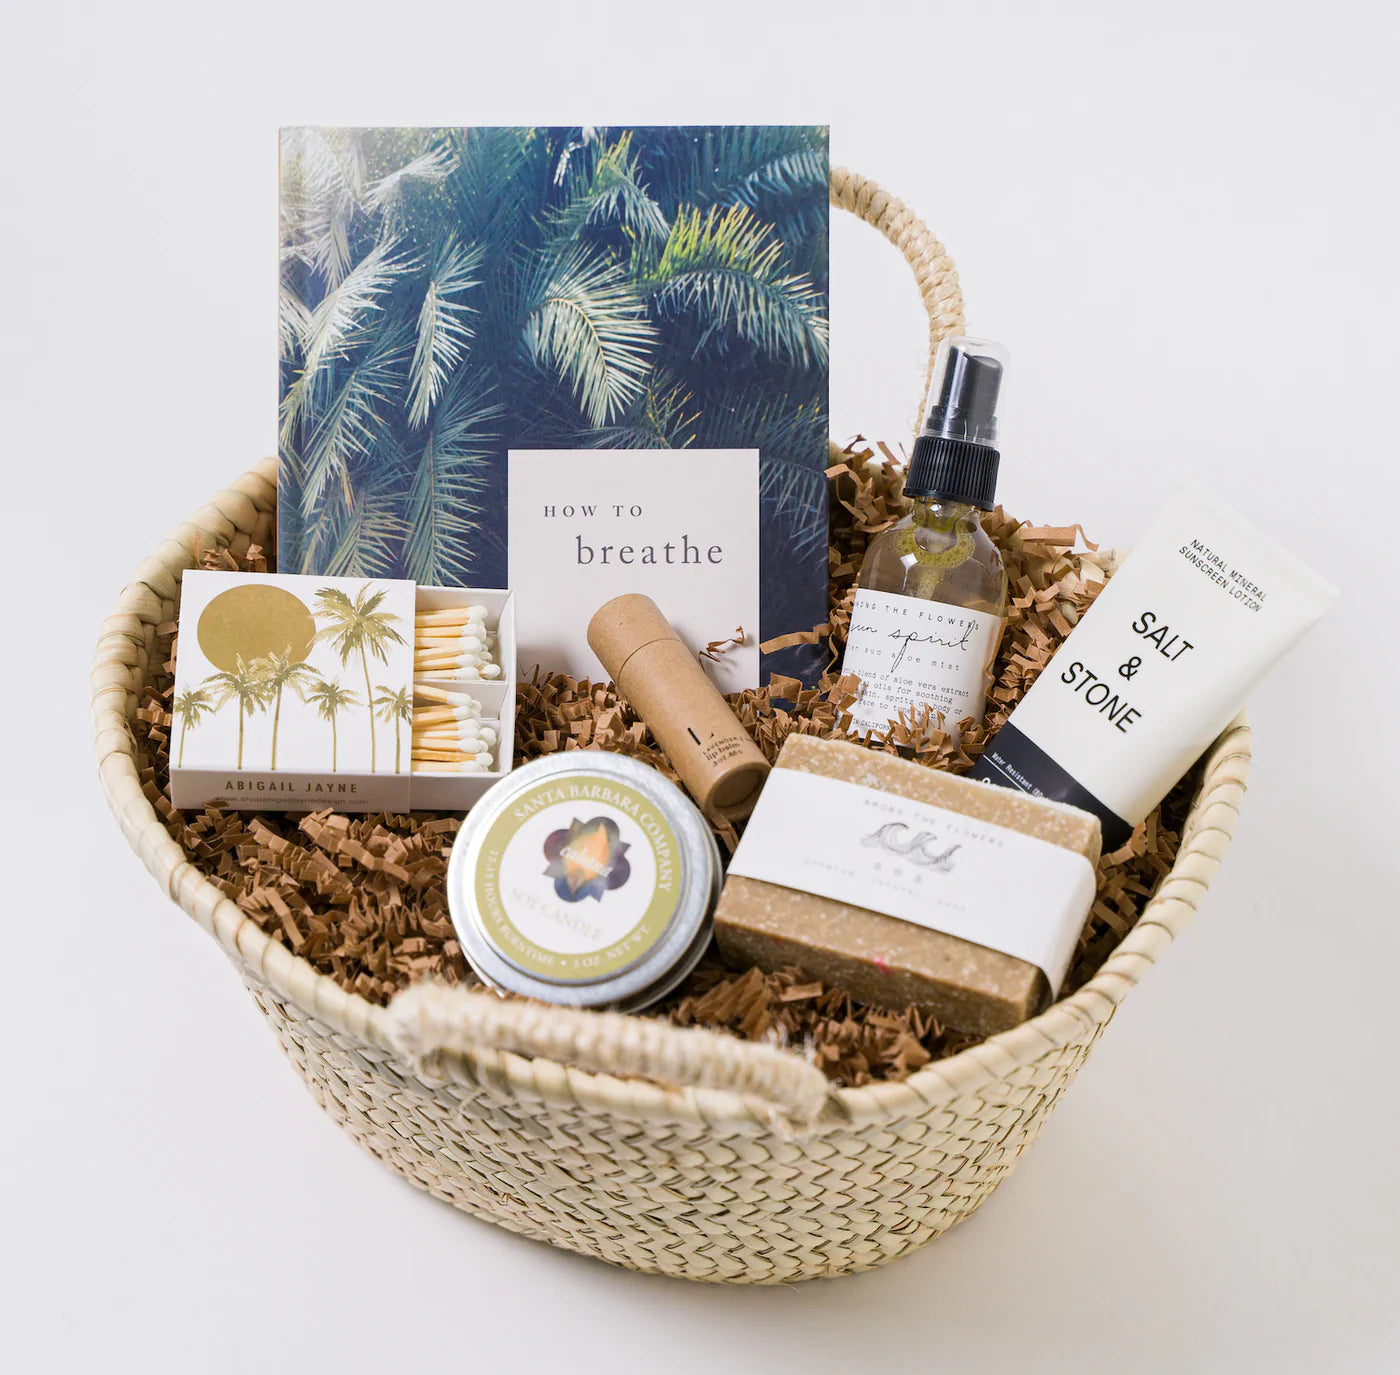 A basket filled with a book, a candle, matches, lip balm, a spray, sunscreen, and soap